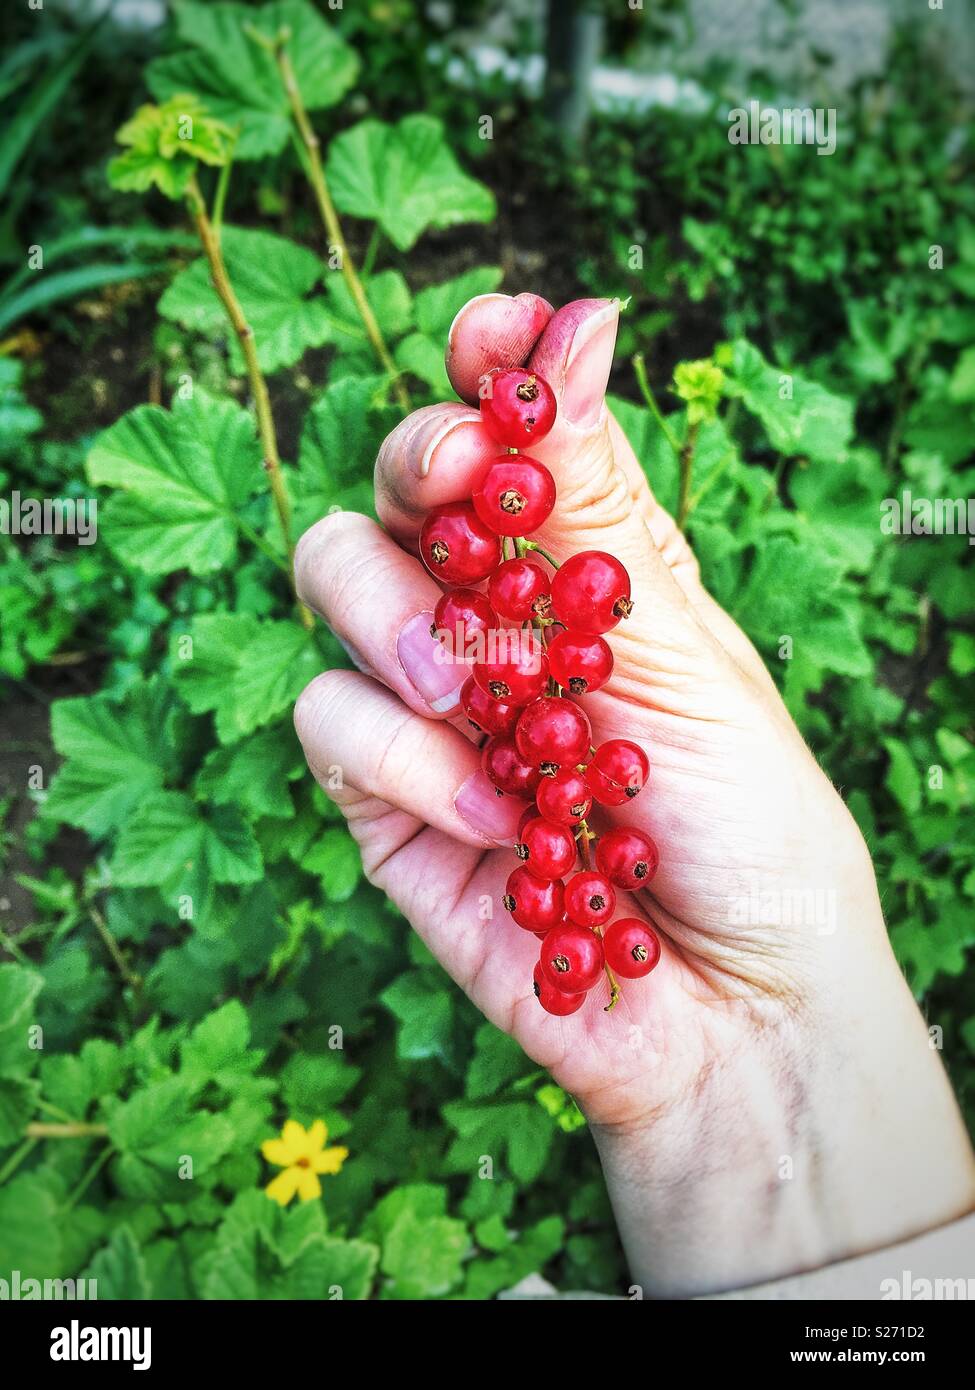 Harvest, red currant in a hand Stock Photo